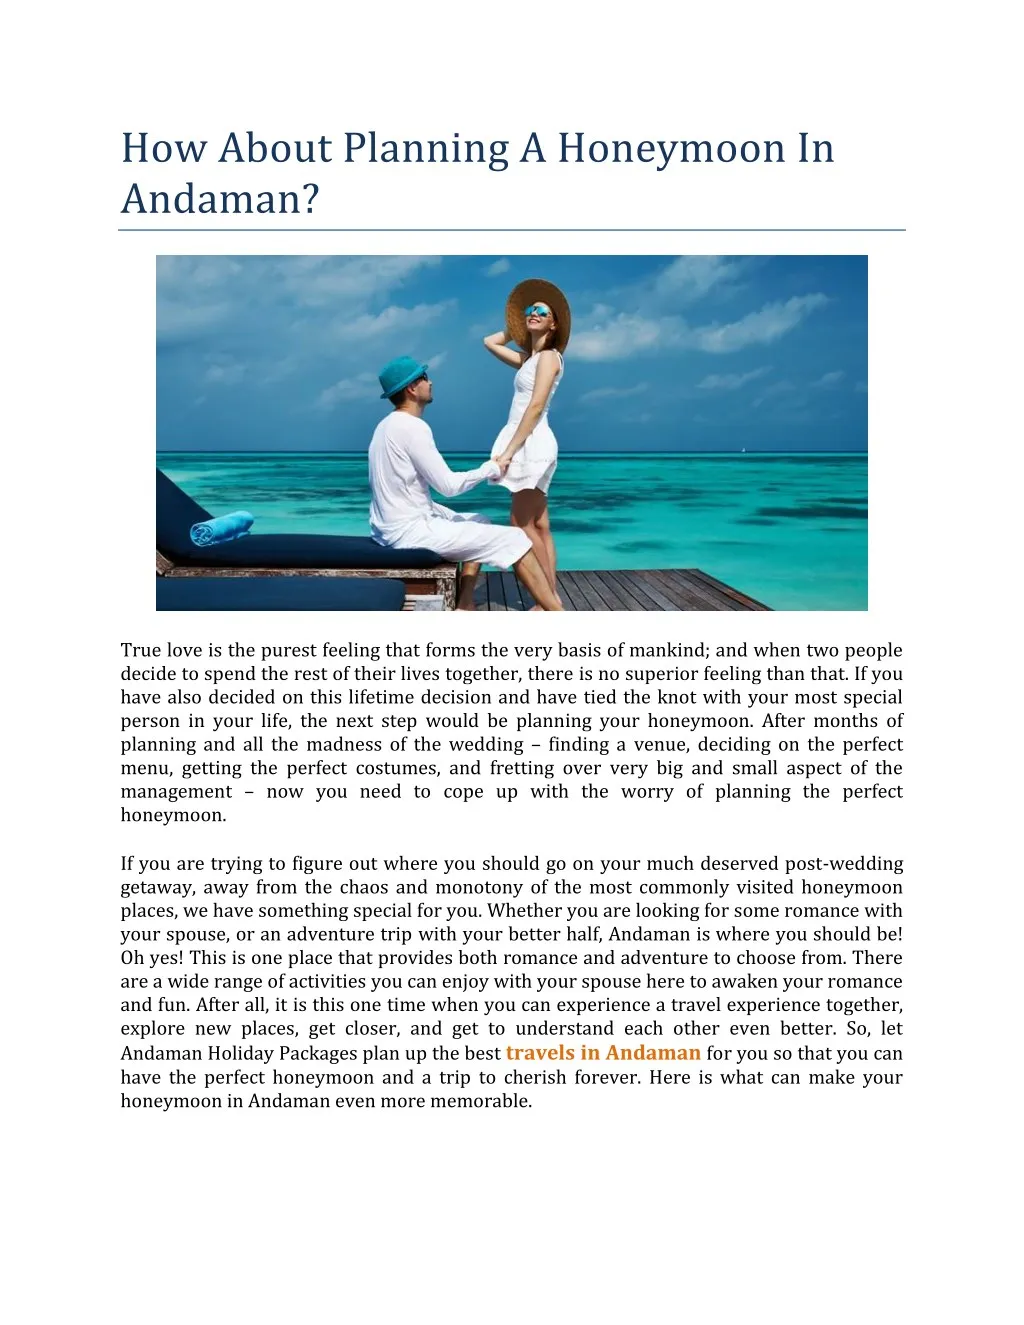 how about planning a honeymoon in andaman